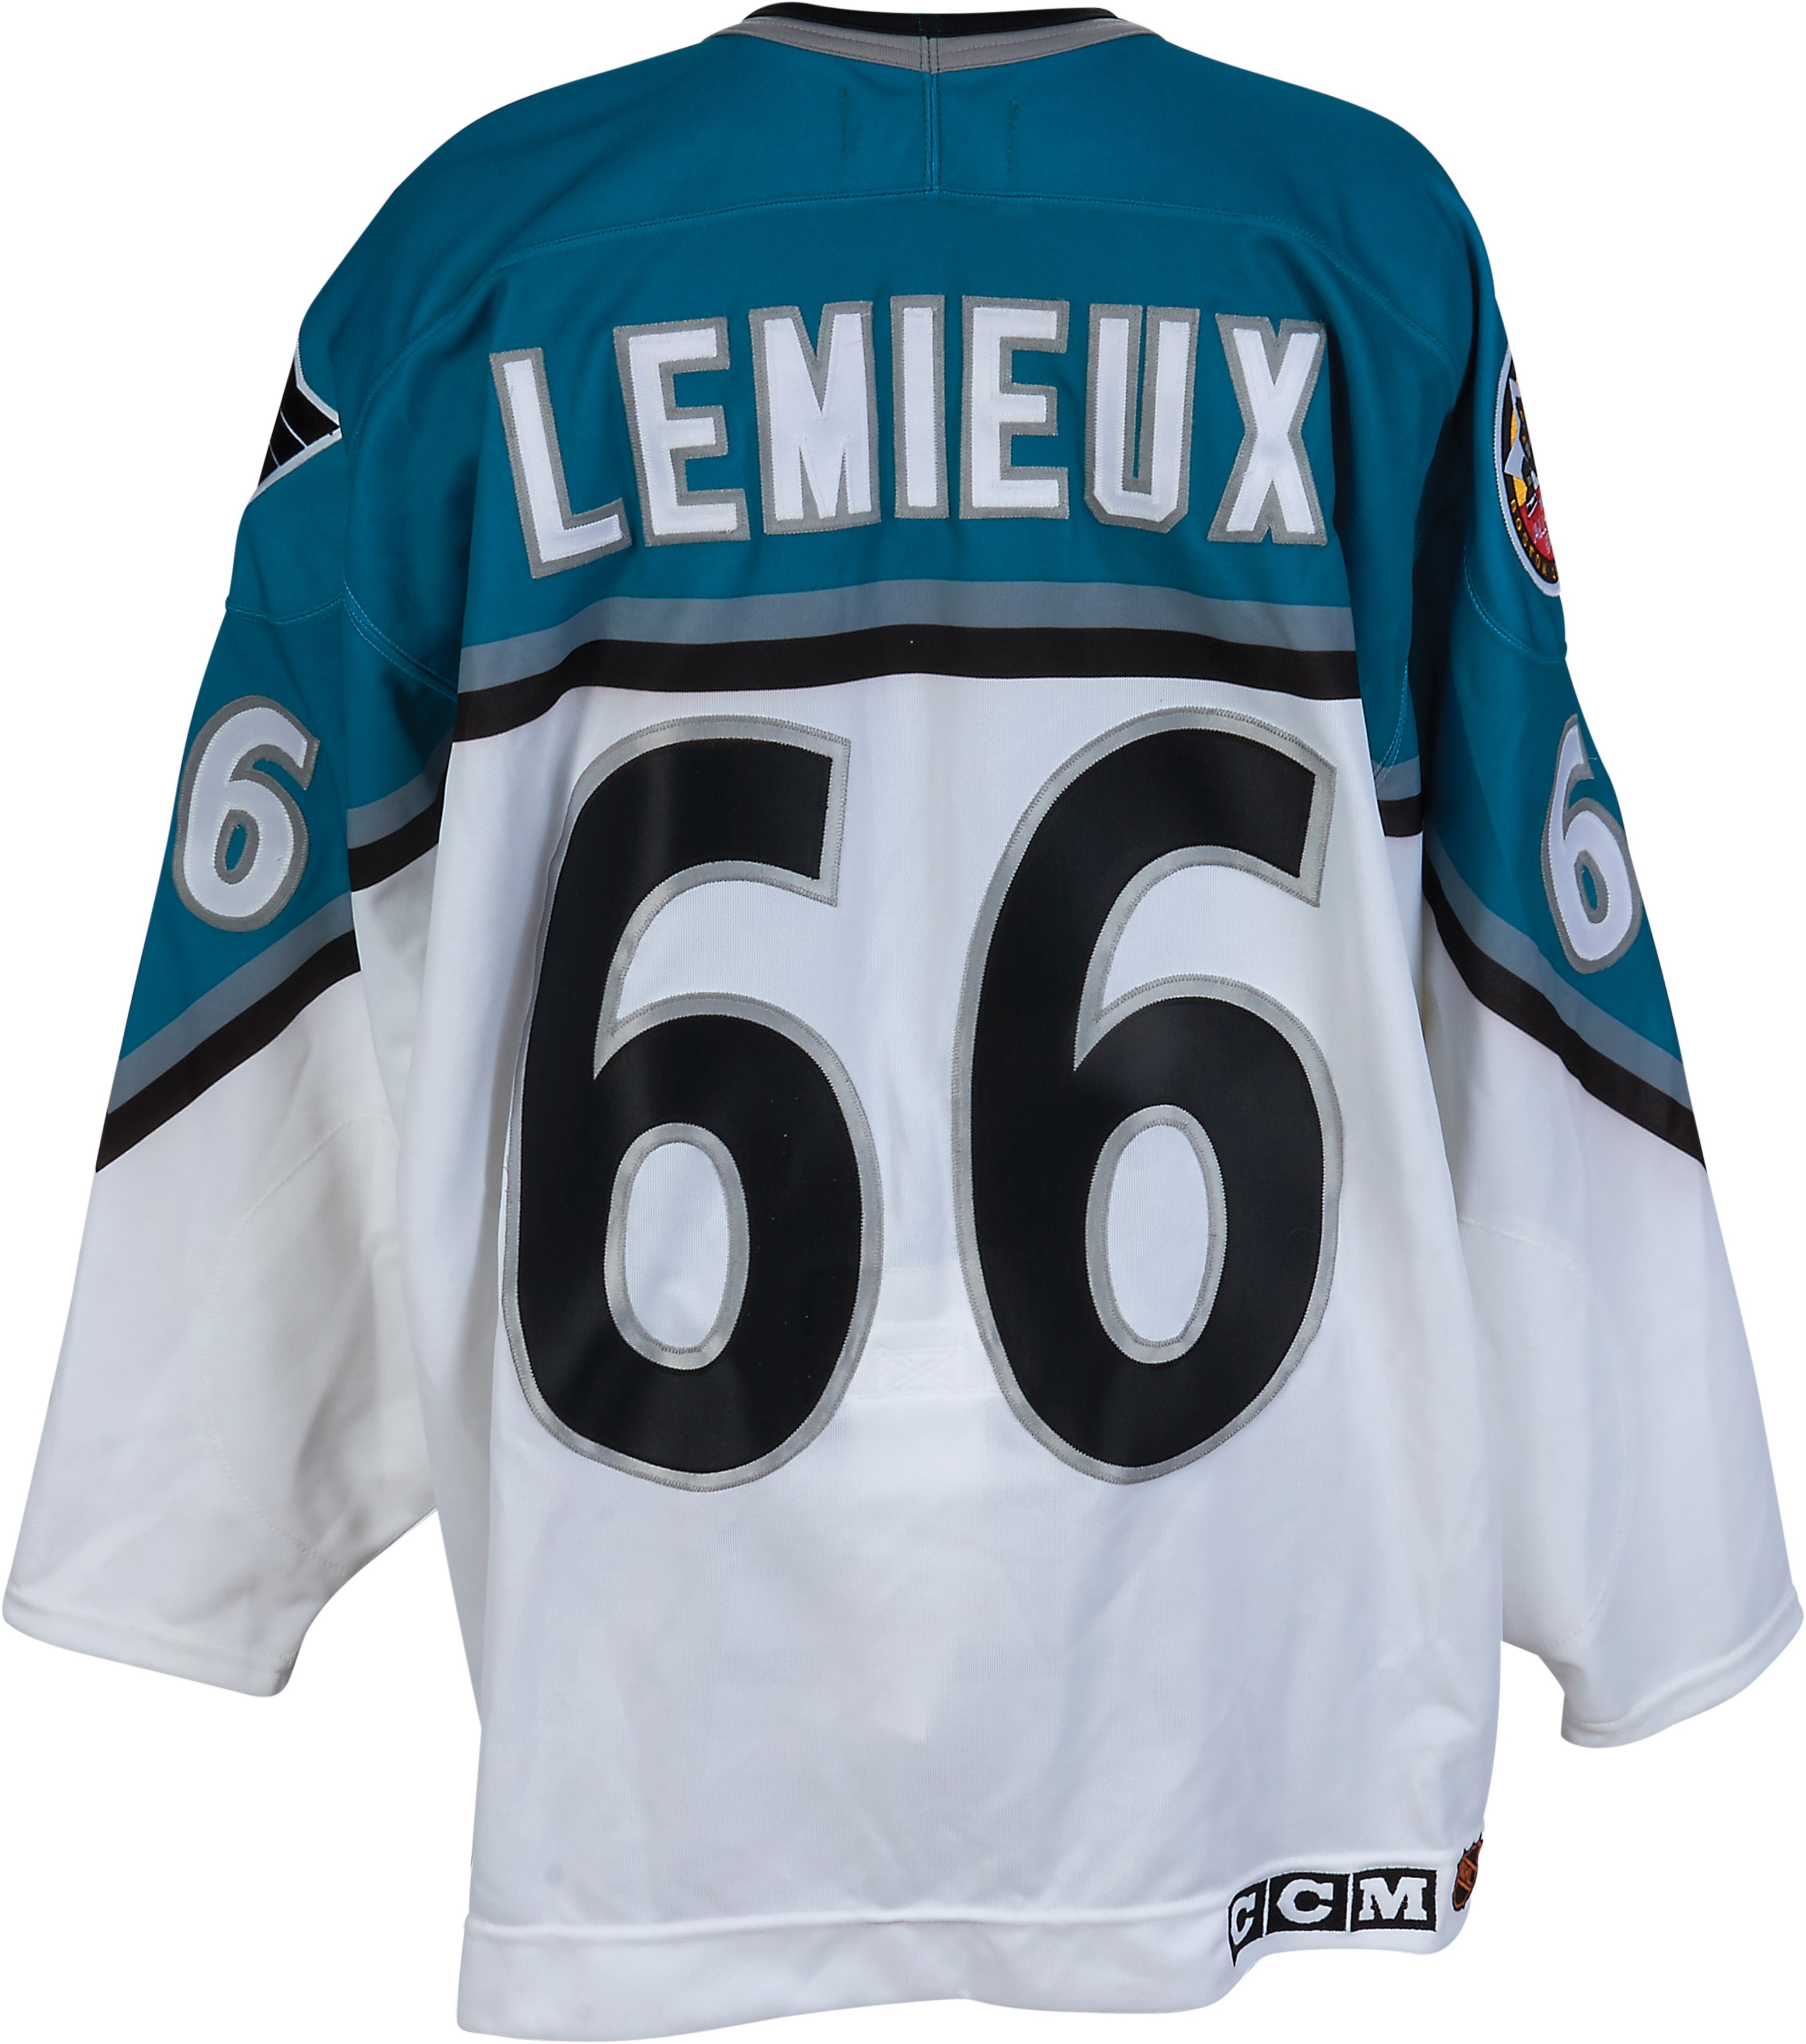 1996 Mario Lemieux NHL All-Star Game Worn Jersey (Photo-Matched)